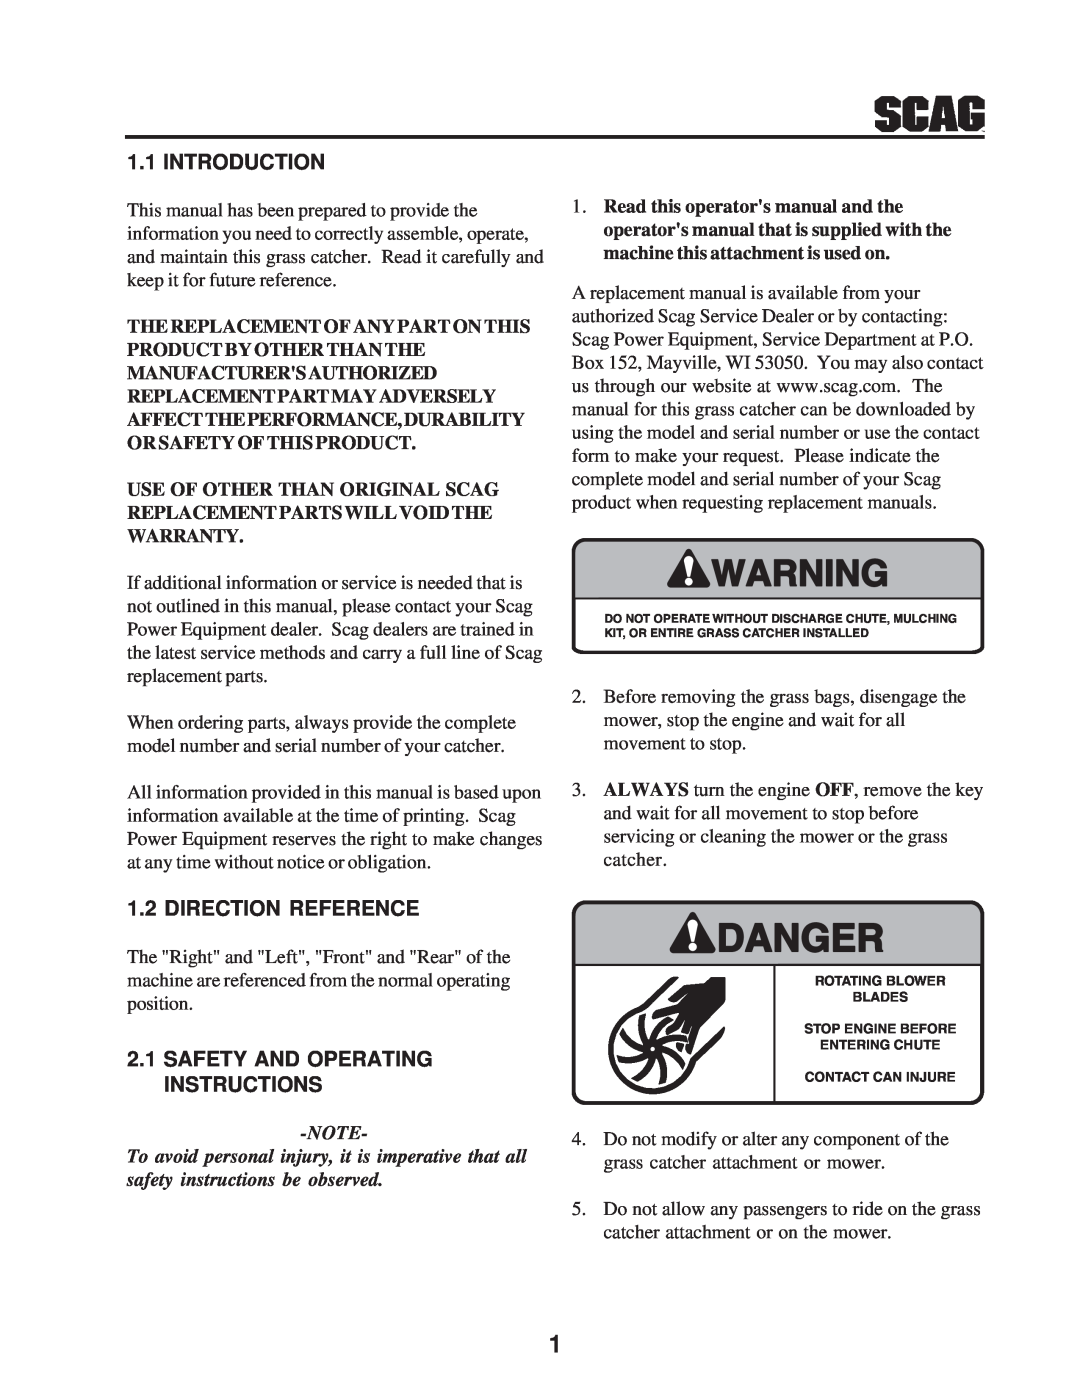 Scag Power Equipment GC-STC-V Introduction, Direction Reference, Safety And Operating Instructions, Danger 